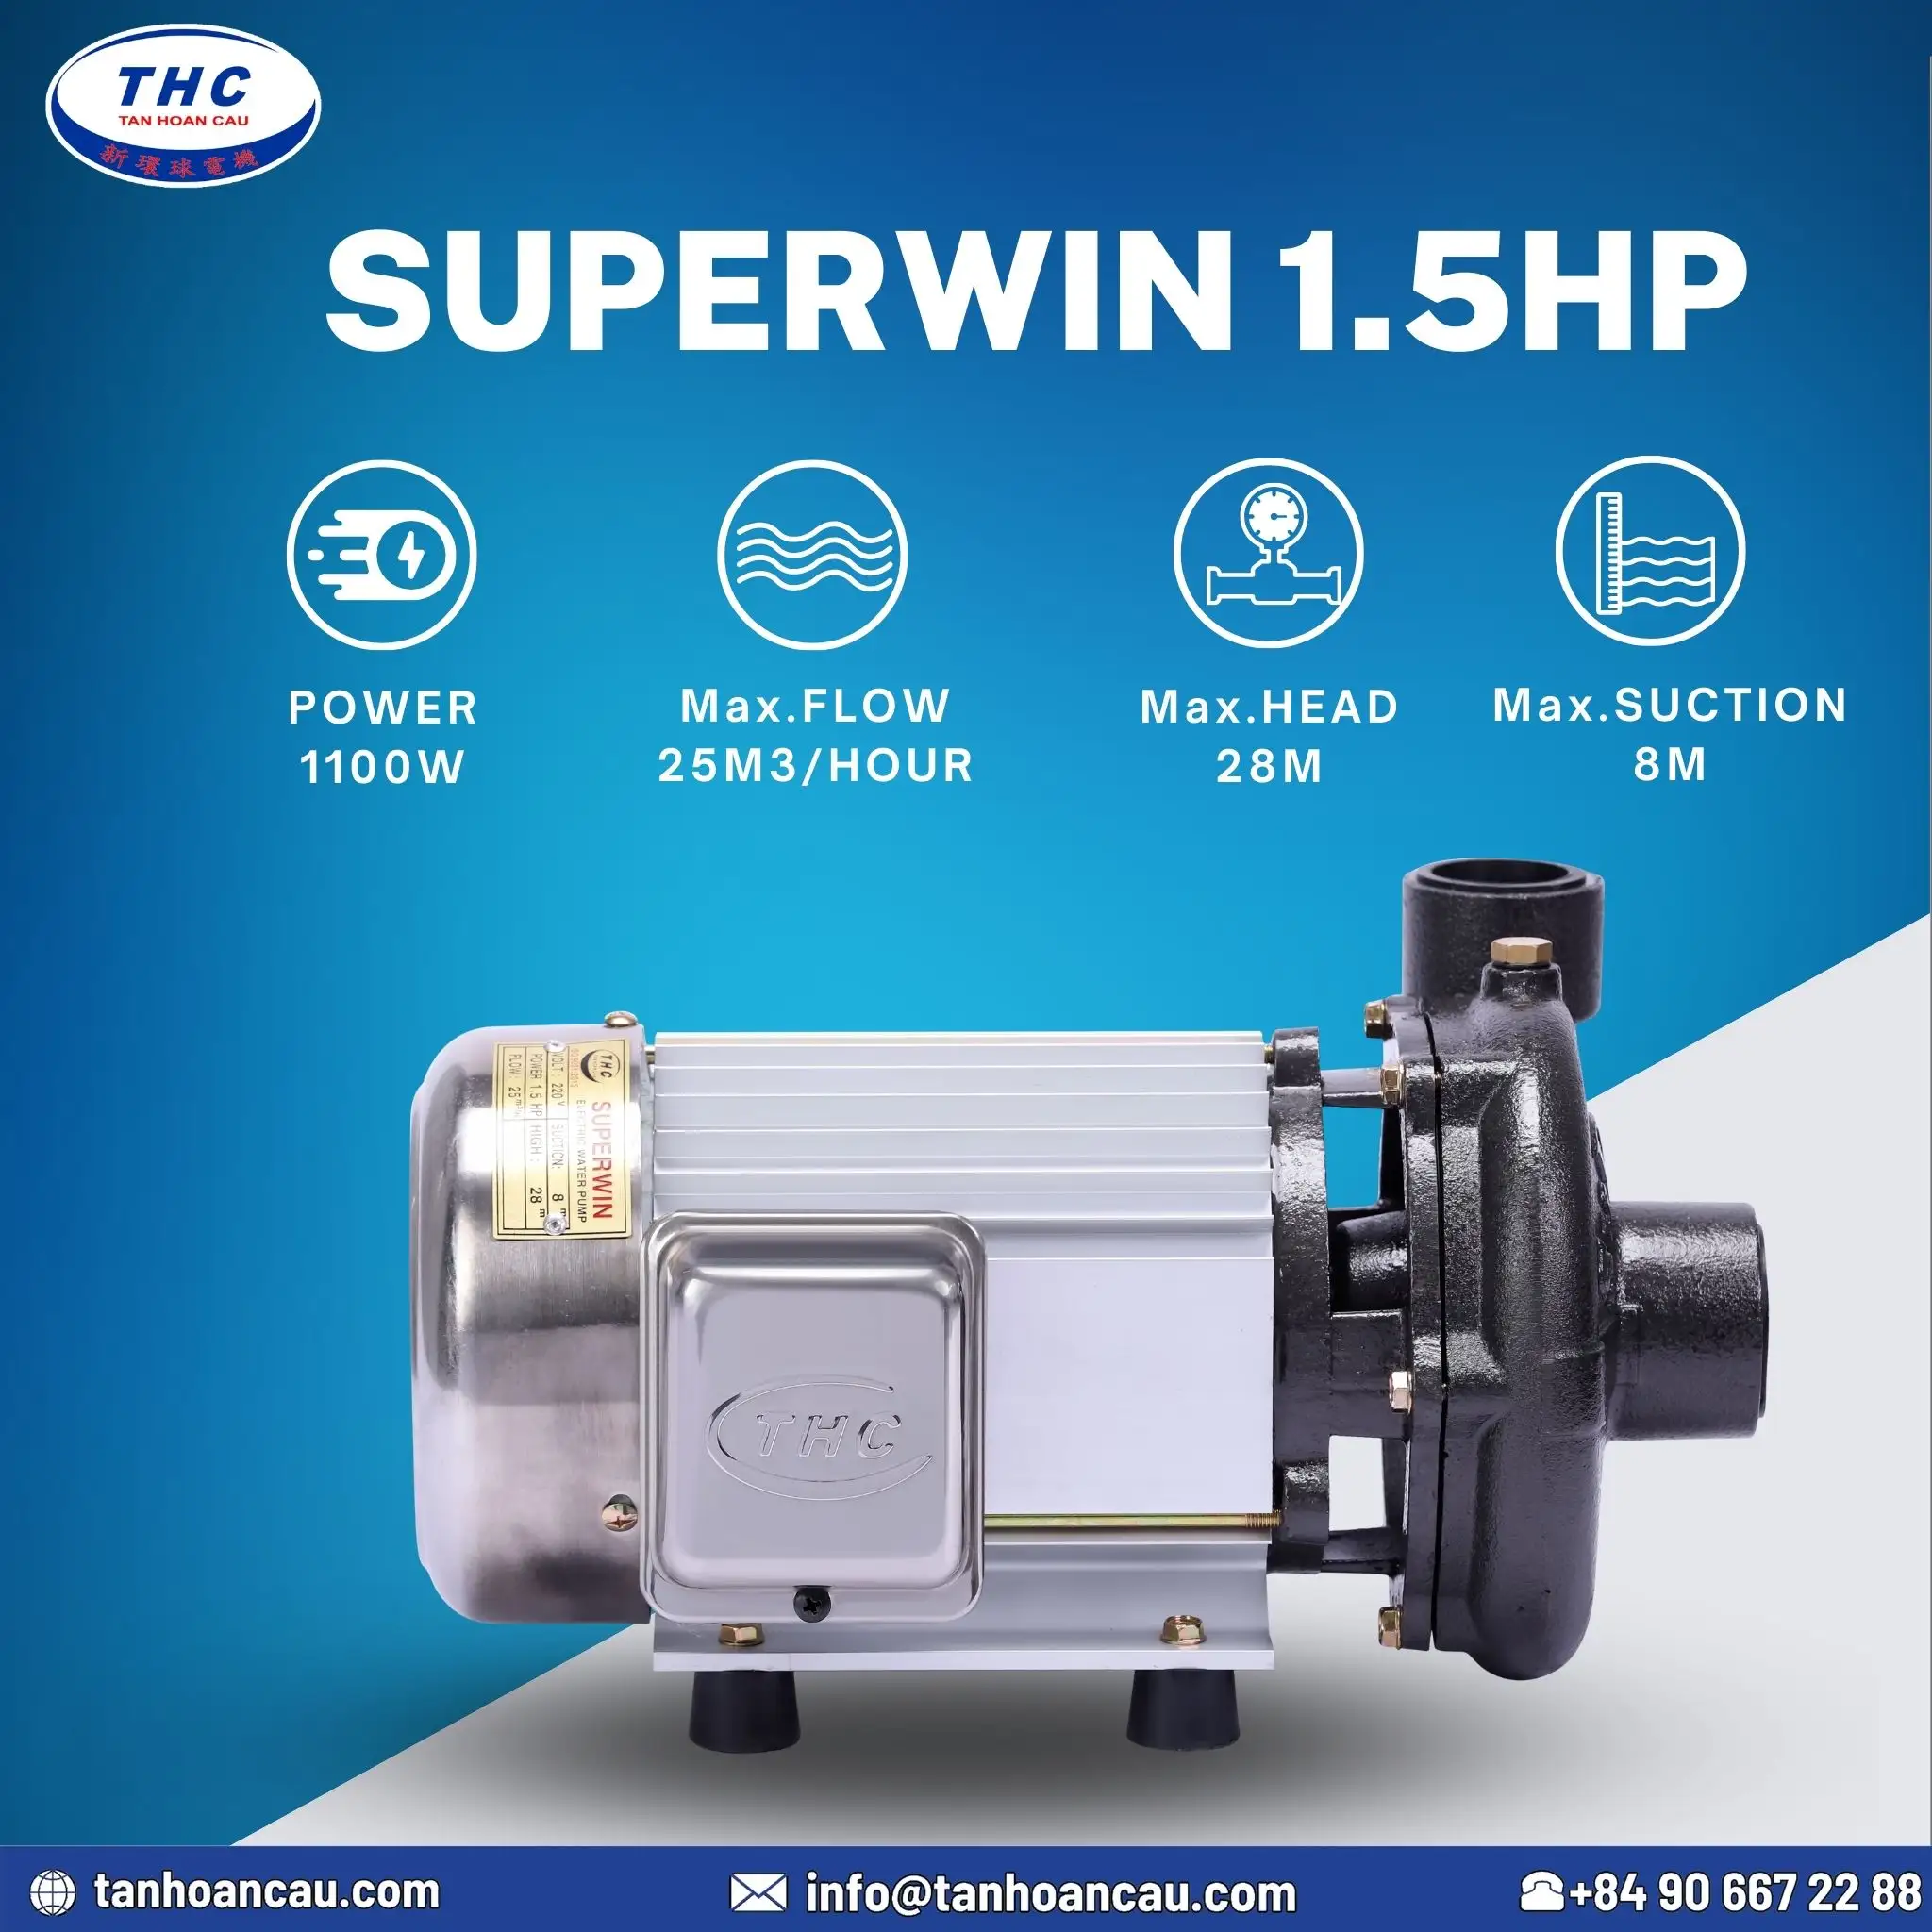 100% Copper Wire Motor 2 Years Warranty Electric Centrifugal Pump Superwin High Pressure Water Pump 1.5HP